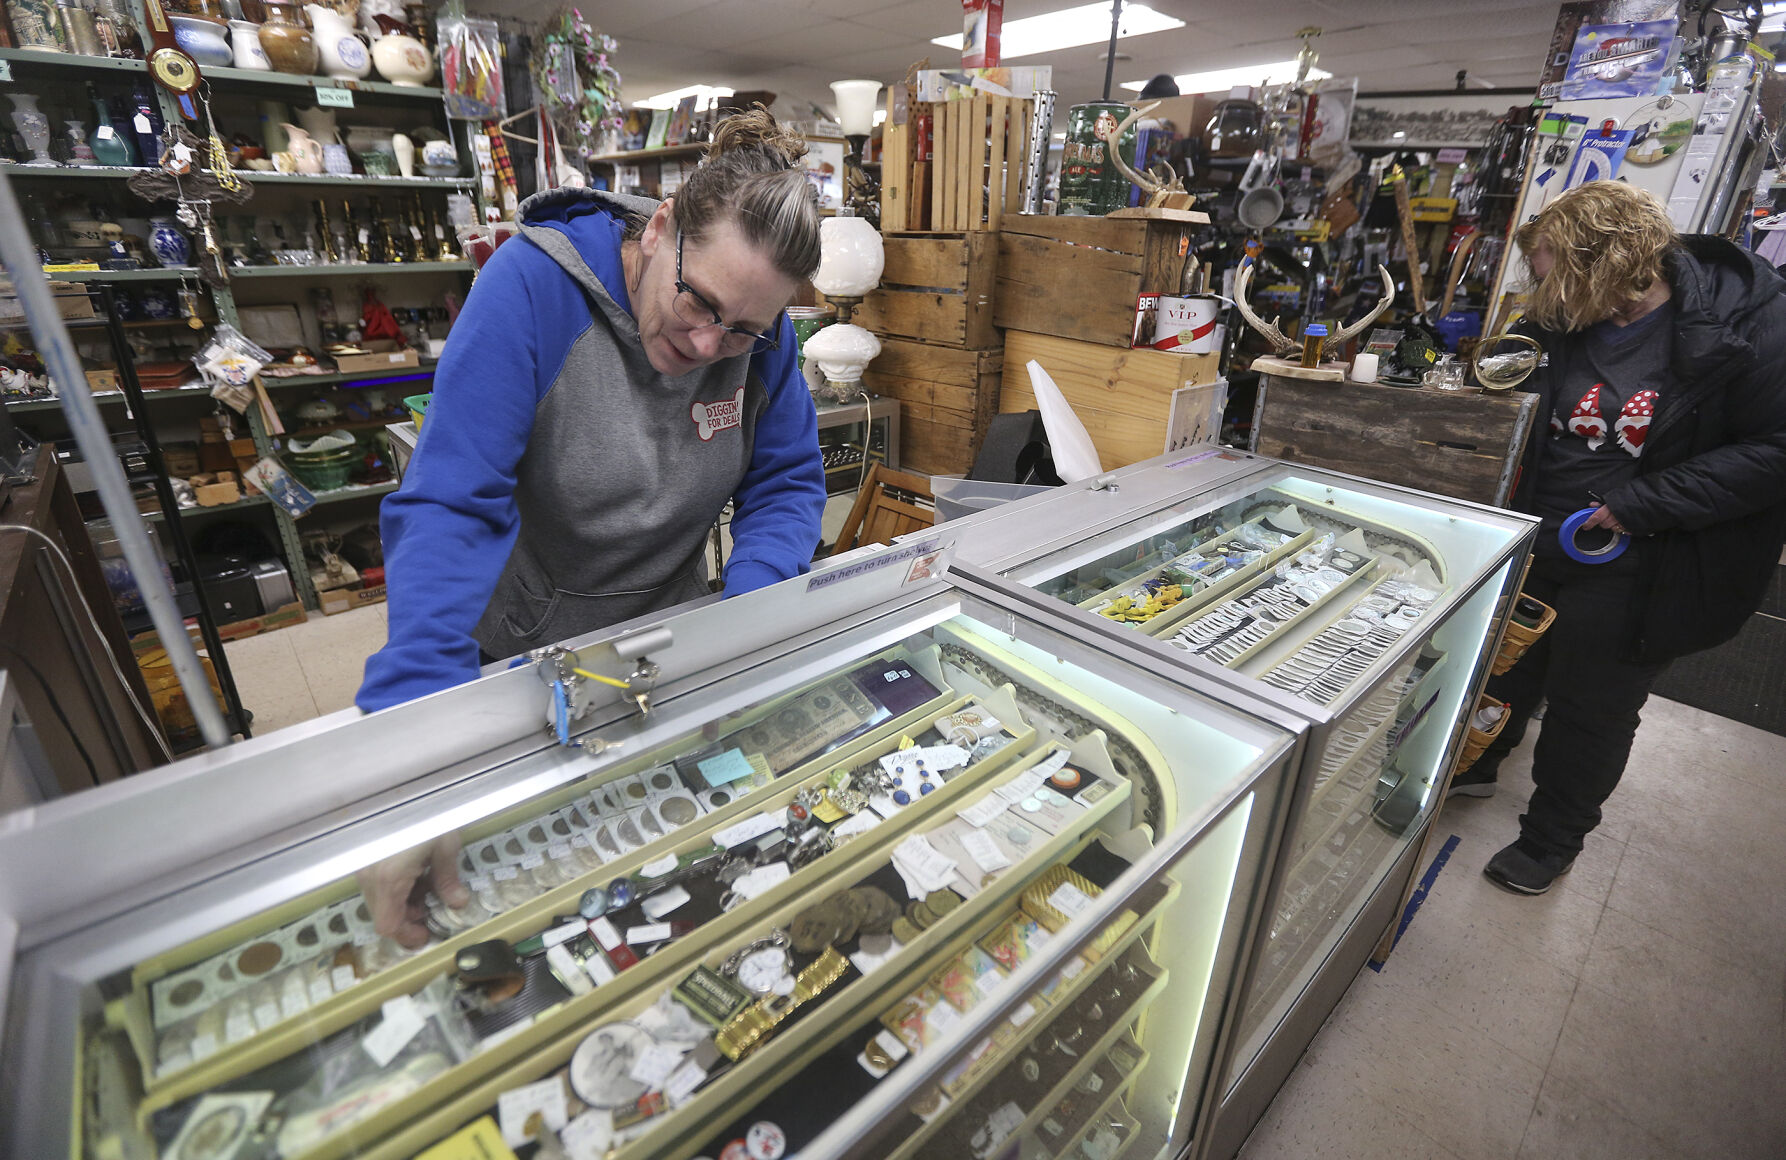 Co-owner of Shaggy’s Indoor Flea Market Lisa Hammel arranges items in a display case in the Dubuque store located off of North Crescent Ridge.    PHOTO CREDIT: Dave Kettering